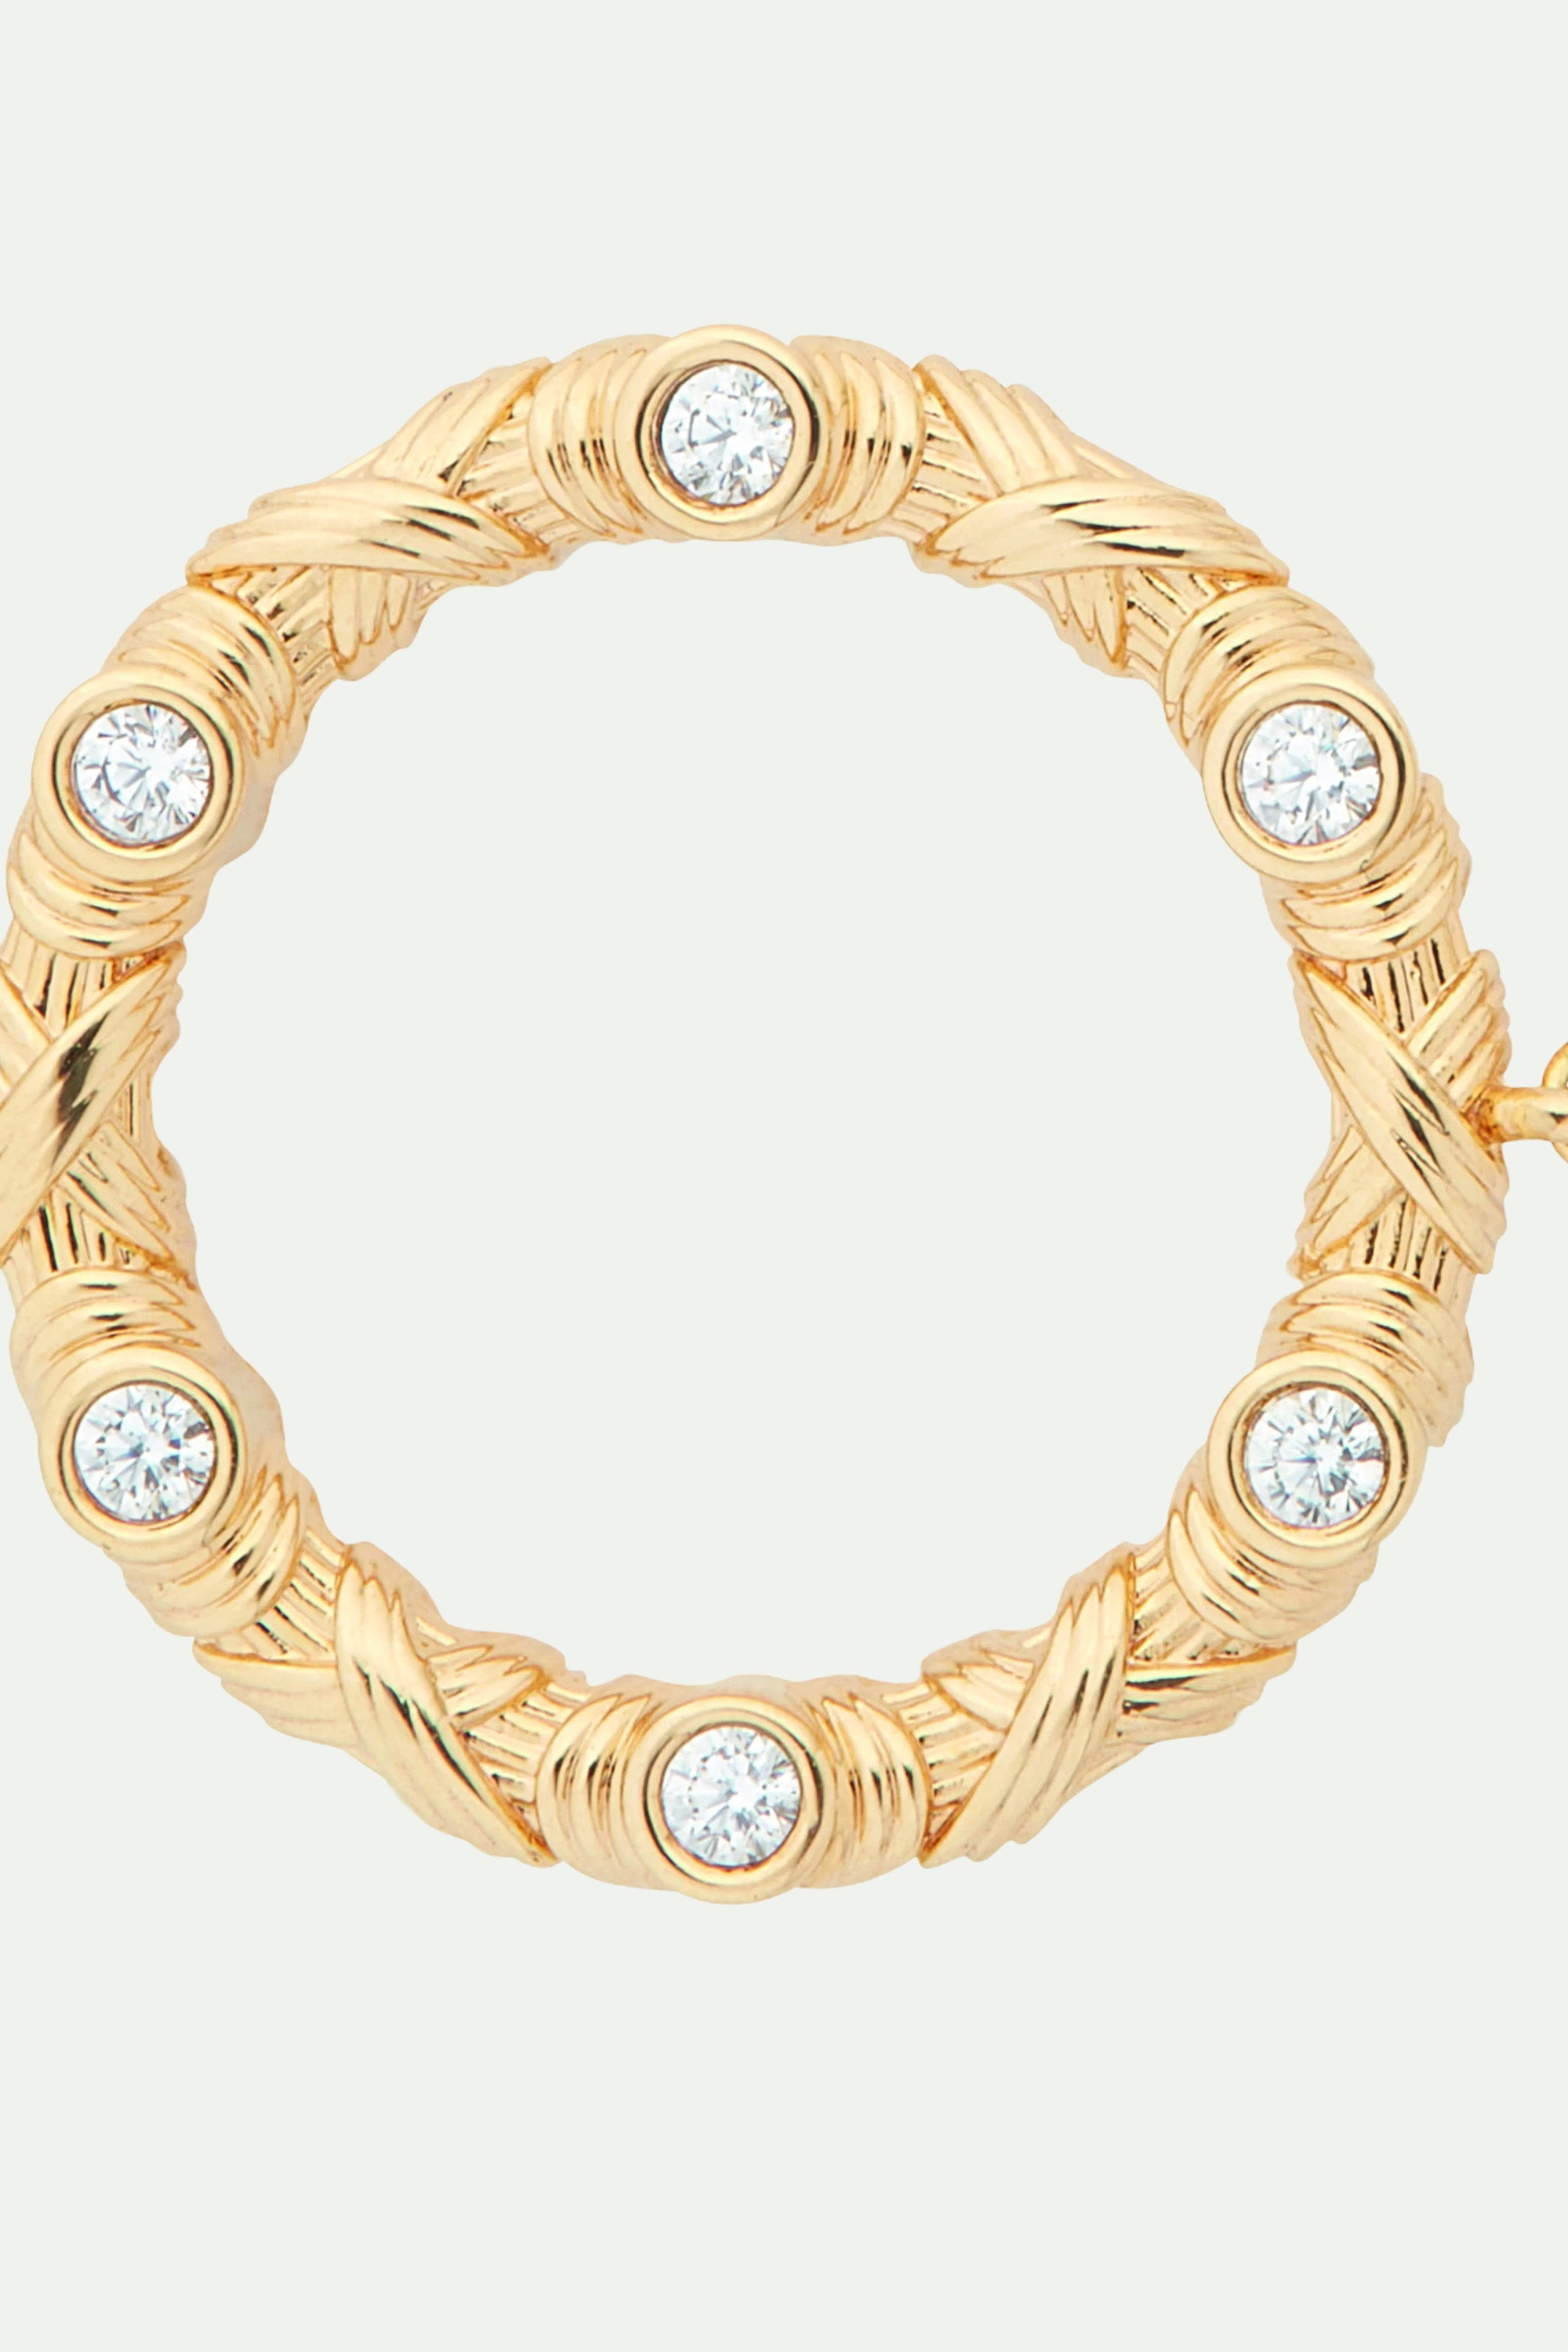 Woven basketry circle and crystal thin bracelet